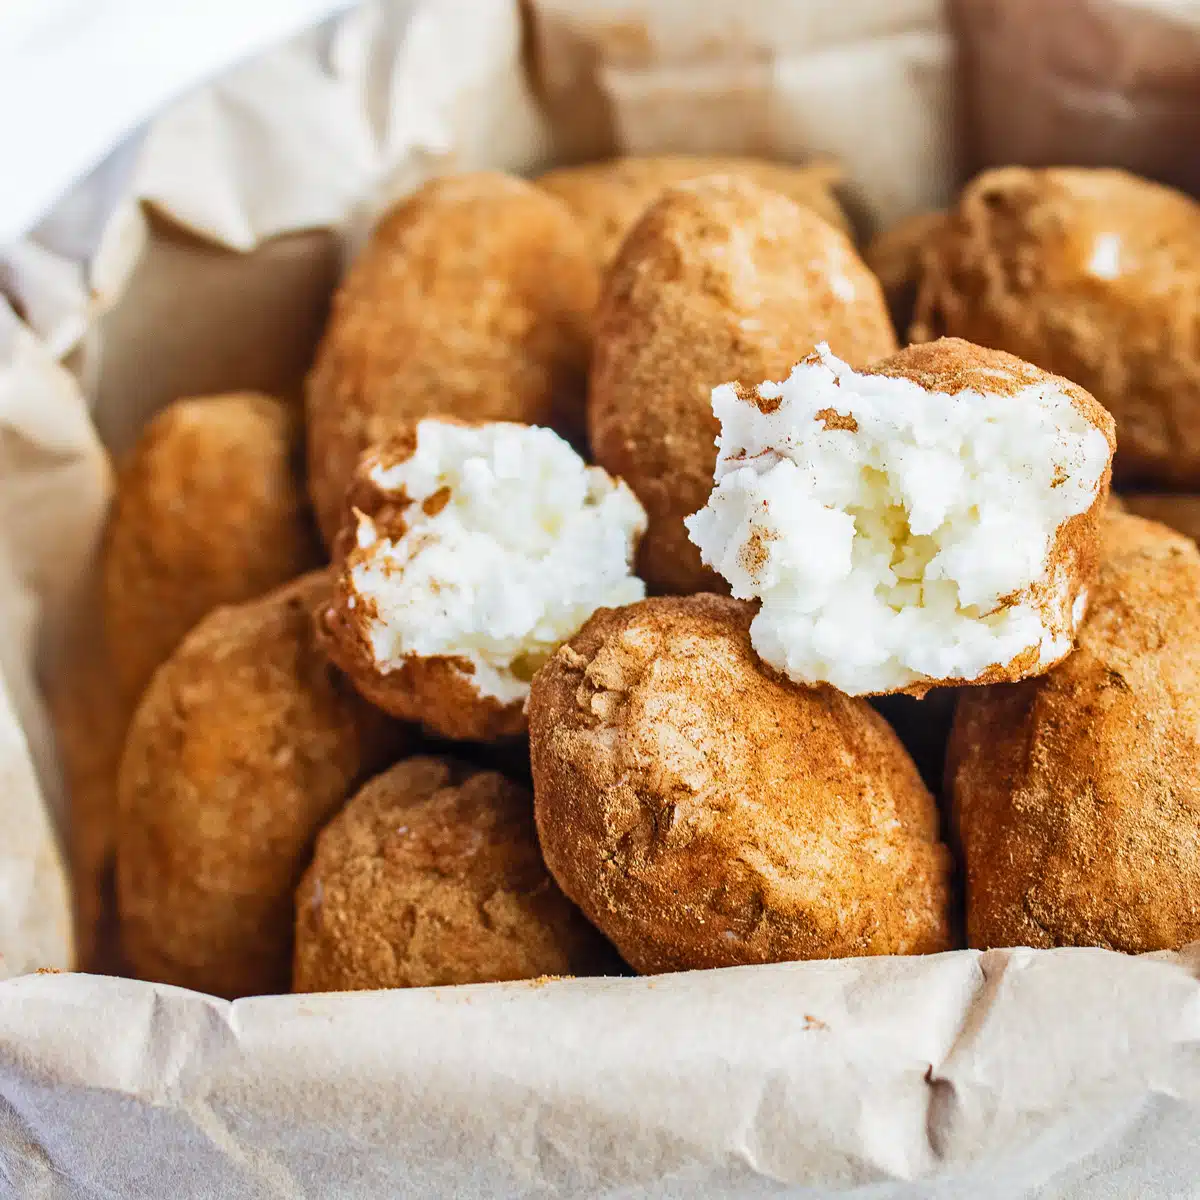 Best Irish potato candy recipe makes these incredibly cute potato shaped balls of creamy coconut filling rolled in cinnamon.